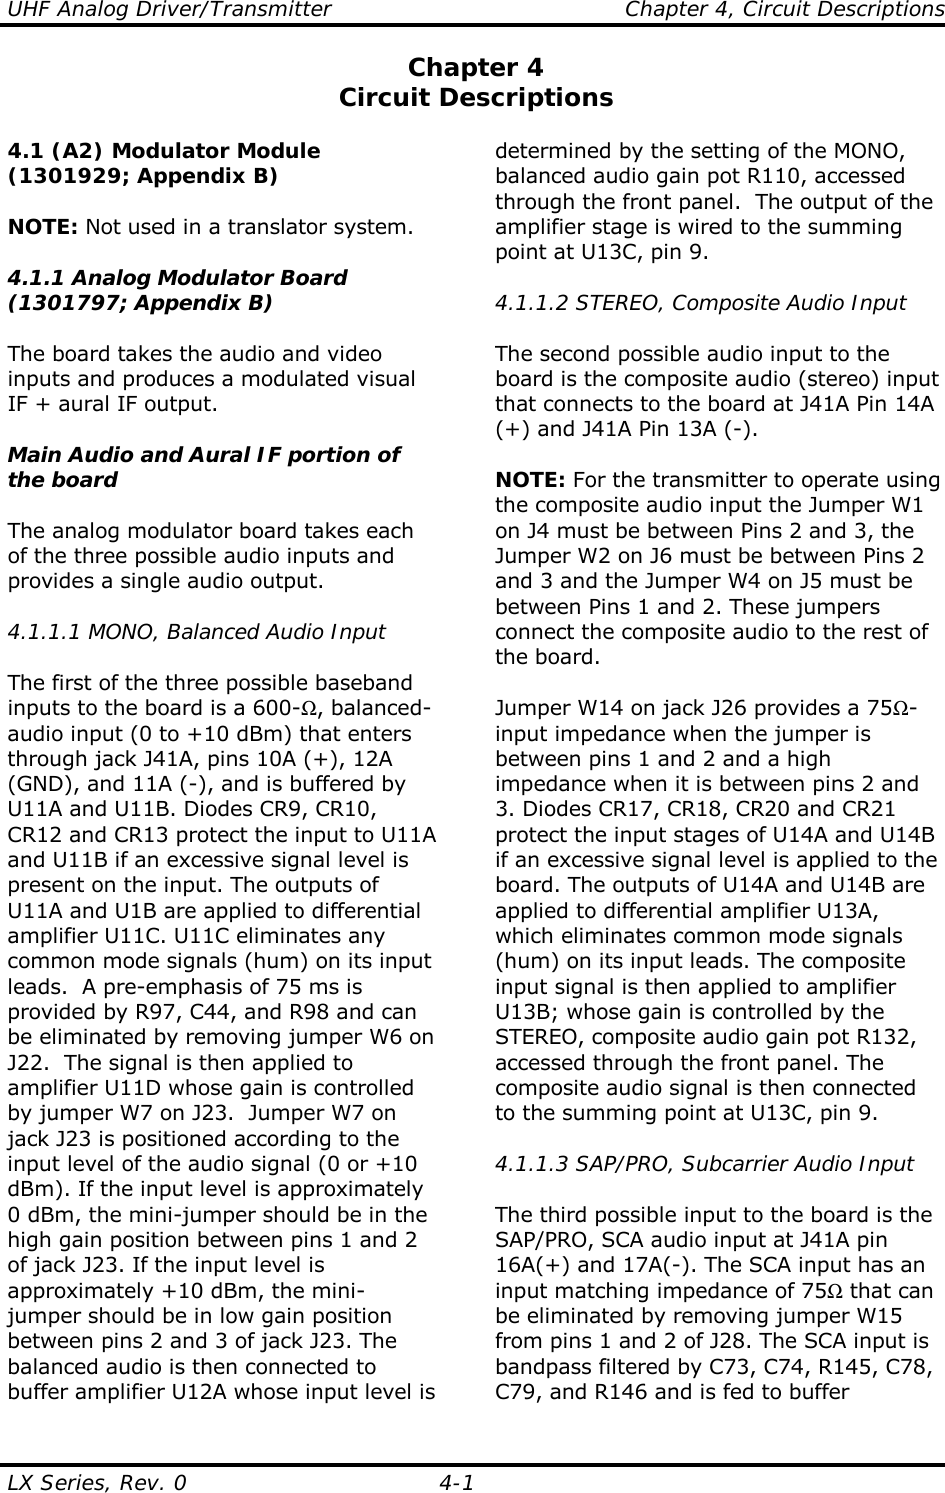 UHF Analog Driver/Transmitter    Chapter 4, Circuit Descriptions LX Series, Rev. 0  4-1 Chapter 4 Circuit Descriptions  4.1 (A2) Modulator Module (1301929; Appendix B)  NOTE: Not used in a translator system.  4.1.1 Analog Modulator Board (1301797; Appendix B)  The board takes the audio and video inputs and produces a modulated visual IF + aural IF output.  Main Audio and Aural IF portion of the board  The analog modulator board takes each of the three possible audio inputs and provides a single audio output.  4.1.1.1 MONO, Balanced Audio Input  The first of the three possible baseband inputs to the board is a 600-Ω, balanced-audio input (0 to +10 dBm) that enters through jack J41A, pins 10A (+), 12A (GND), and 11A (-), and is buffered by U11A and U11B. Diodes CR9, CR10, CR12 and CR13 protect the input to U11A and U11B if an excessive signal level is present on the input. The outputs of U11A and U1B are applied to differential amplifier U11C. U11C eliminates any common mode signals (hum) on its input leads.  A pre-emphasis of 75 ms is provided by R97, C44, and R98 and can be eliminated by removing jumper W6 on J22.  The signal is then applied to amplifier U11D whose gain is controlled by jumper W7 on J23.  Jumper W7 on jack J23 is positioned according to the input level of the audio signal (0 or +10 dBm). If the input level is approximately 0 dBm, the mini-jumper should be in the high gain position between pins 1 and 2 of jack J23. If the input level is approximately +10 dBm, the mini-jumper should be in low gain position between pins 2 and 3 of jack J23. The balanced audio is then connected to buffer amplifier U12A whose input level is determined by the setting of the MONO, balanced audio gain pot R110, accessed through the front panel.  The output of the amplifier stage is wired to the summing point at U13C, pin 9.  4.1.1.2 STEREO, Composite Audio Input  The second possible audio input to the board is the composite audio (stereo) input that connects to the board at J41A Pin 14A (+) and J41A Pin 13A (-).  NOTE: For the transmitter to operate using the composite audio input the Jumper W1 on J4 must be between Pins 2 and 3, the Jumper W2 on J6 must be between Pins 2 and 3 and the Jumper W4 on J5 must be between Pins 1 and 2. These jumpers connect the composite audio to the rest of the board.  Jumper W14 on jack J26 provides a 75Ω-input impedance when the jumper is between pins 1 and 2 and a high impedance when it is between pins 2 and 3. Diodes CR17, CR18, CR20 and CR21 protect the input stages of U14A and U14B if an excessive signal level is applied to the board. The outputs of U14A and U14B are applied to differential amplifier U13A, which eliminates common mode signals (hum) on its input leads. The composite input signal is then applied to amplifier U13B; whose gain is controlled by the STEREO, composite audio gain pot R132, accessed through the front panel. The composite audio signal is then connected to the summing point at U13C, pin 9.  4.1.1.3 SAP/PRO, Subcarrier Audio Input  The third possible input to the board is the SAP/PRO, SCA audio input at J41A pin 16A(+) and 17A(-). The SCA input has an input matching impedance of 75Ω that can be eliminated by removing jumper W15 from pins 1 and 2 of J28. The SCA input is bandpass filtered by C73, C74, R145, C78, C79, and R146 and is fed to buffer 